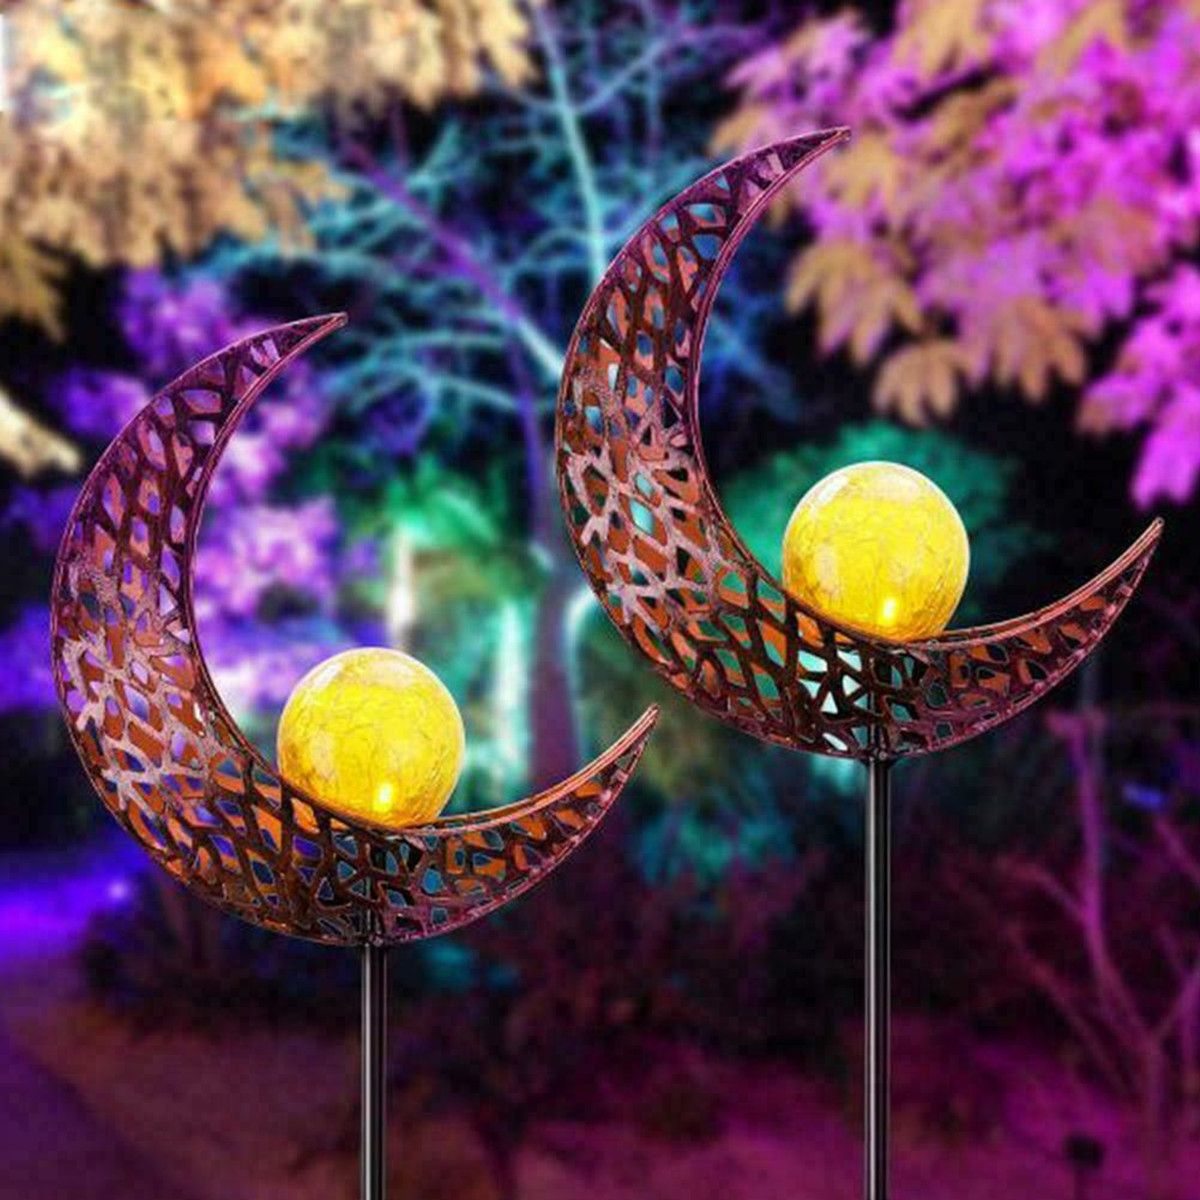 LED-Garden-Solar-Lights-Pathway-Outdoor-Moon-Decor-Crackle-Lawn-Lamp-Glass-1685489